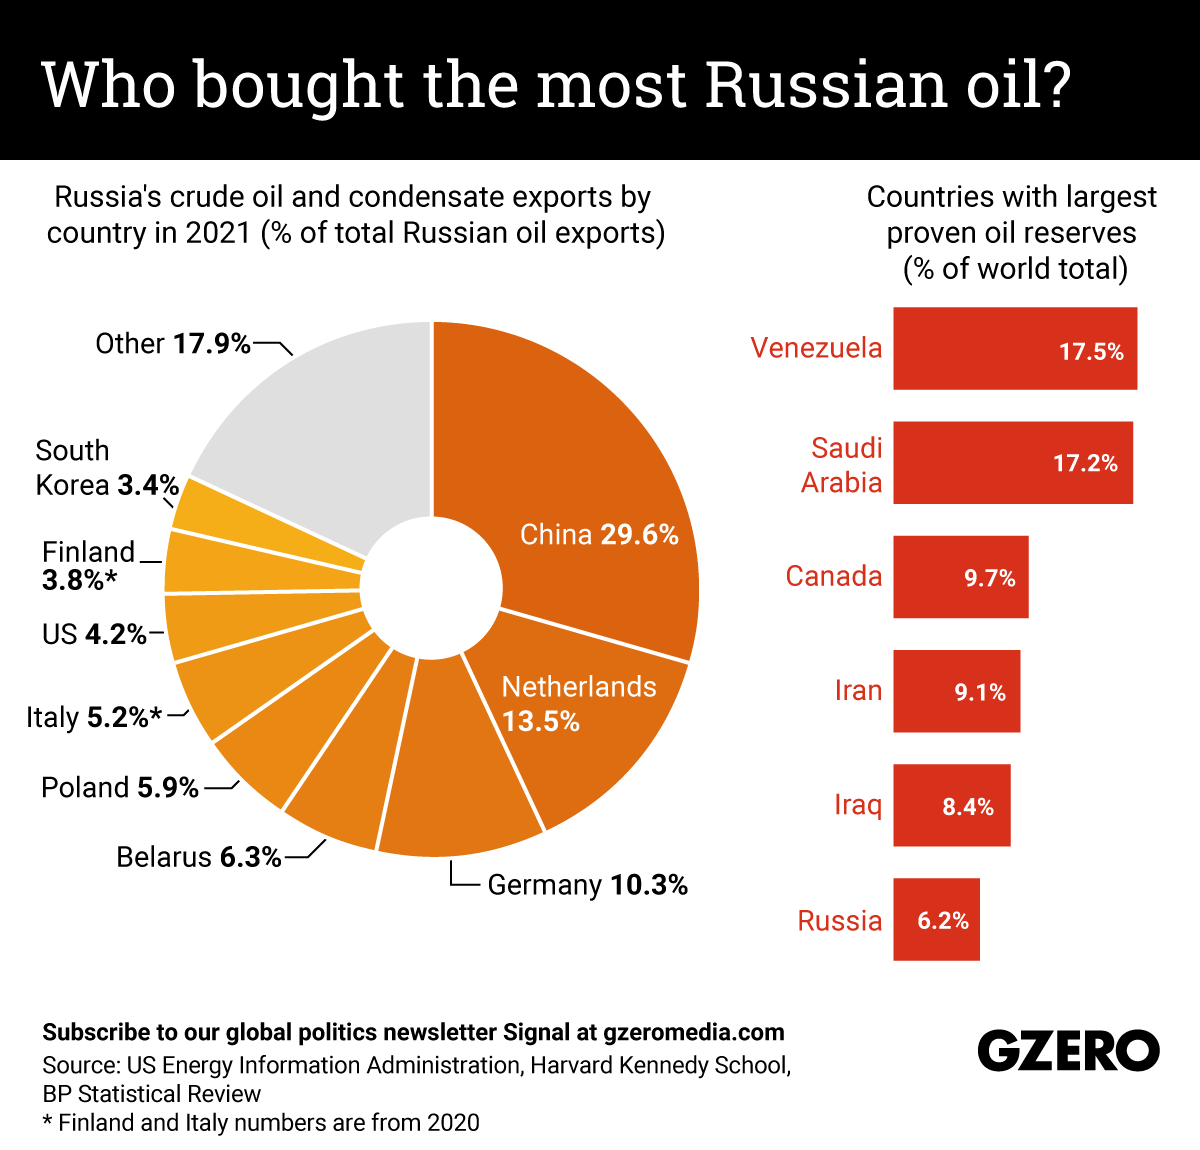 Who bought the most Russian oil